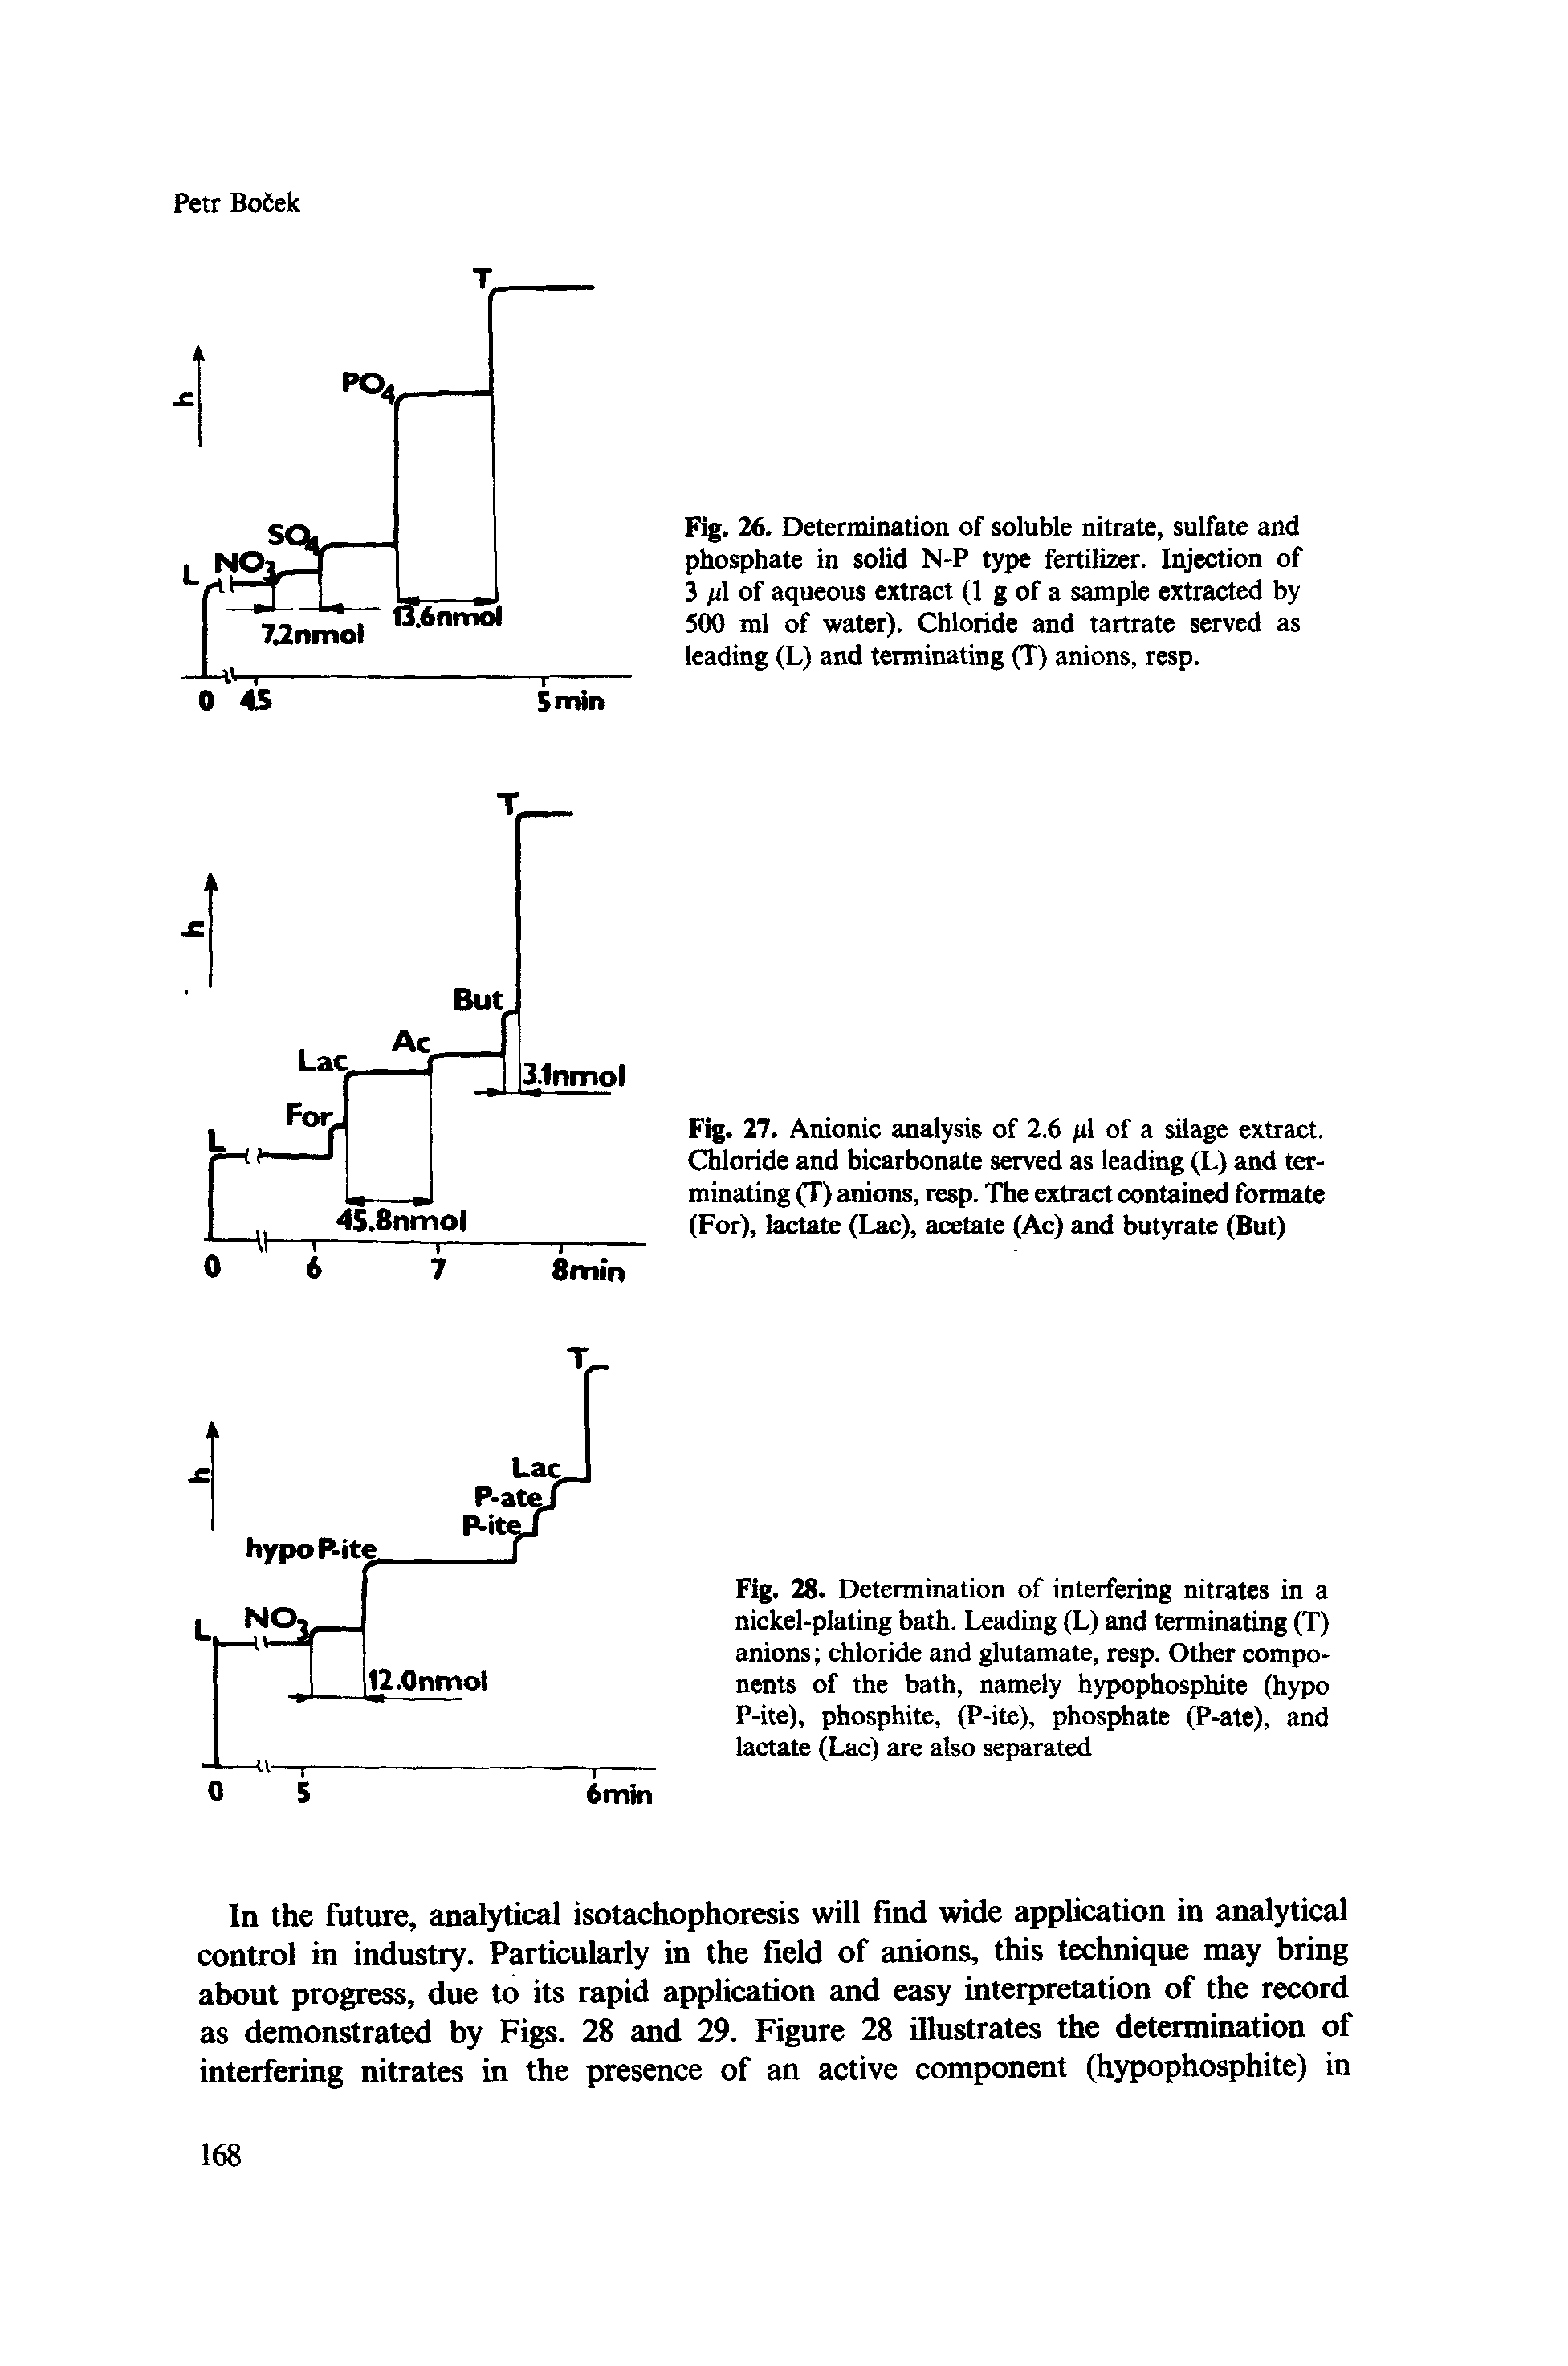 Fig. 26. Determination of soluble nitrate, sulfate and phosphate in solid N-P type fertilizer. Injection of 3 n of aqueous extract (1 g of a sample extracted by 500 ml of water). Chloride and tartrate served as leading (L) and terminating (T) anions, resp.